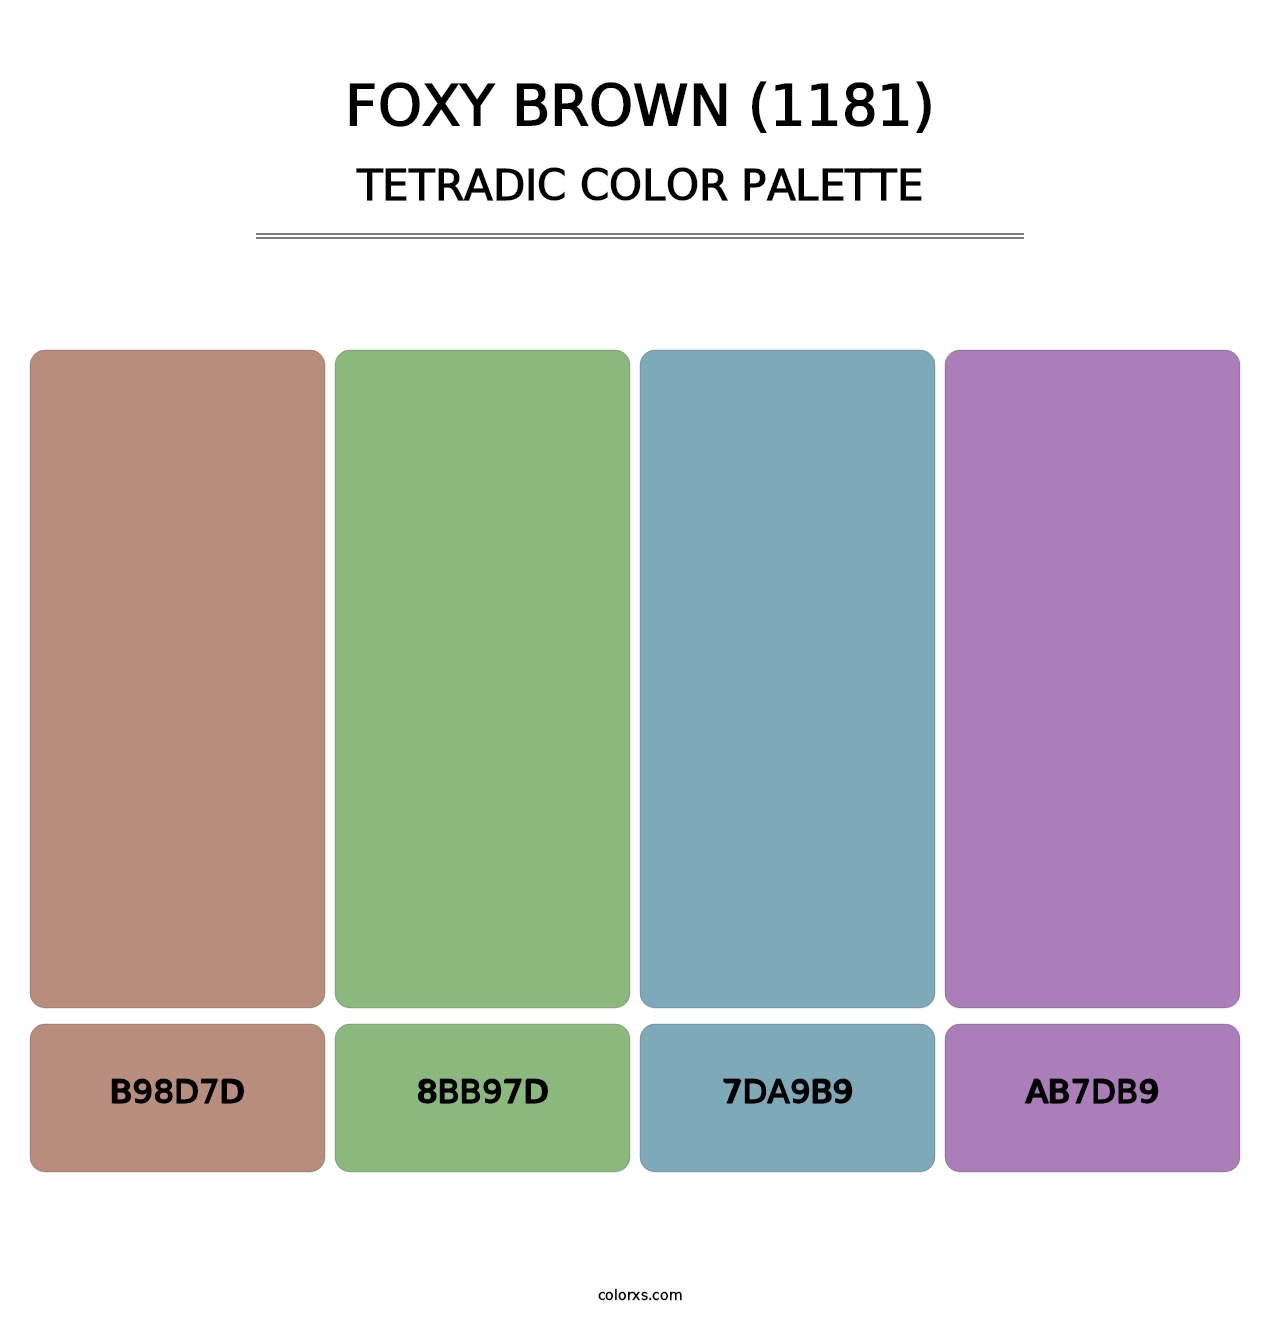 Foxy Brown (1181) - Tetradic Color Palette